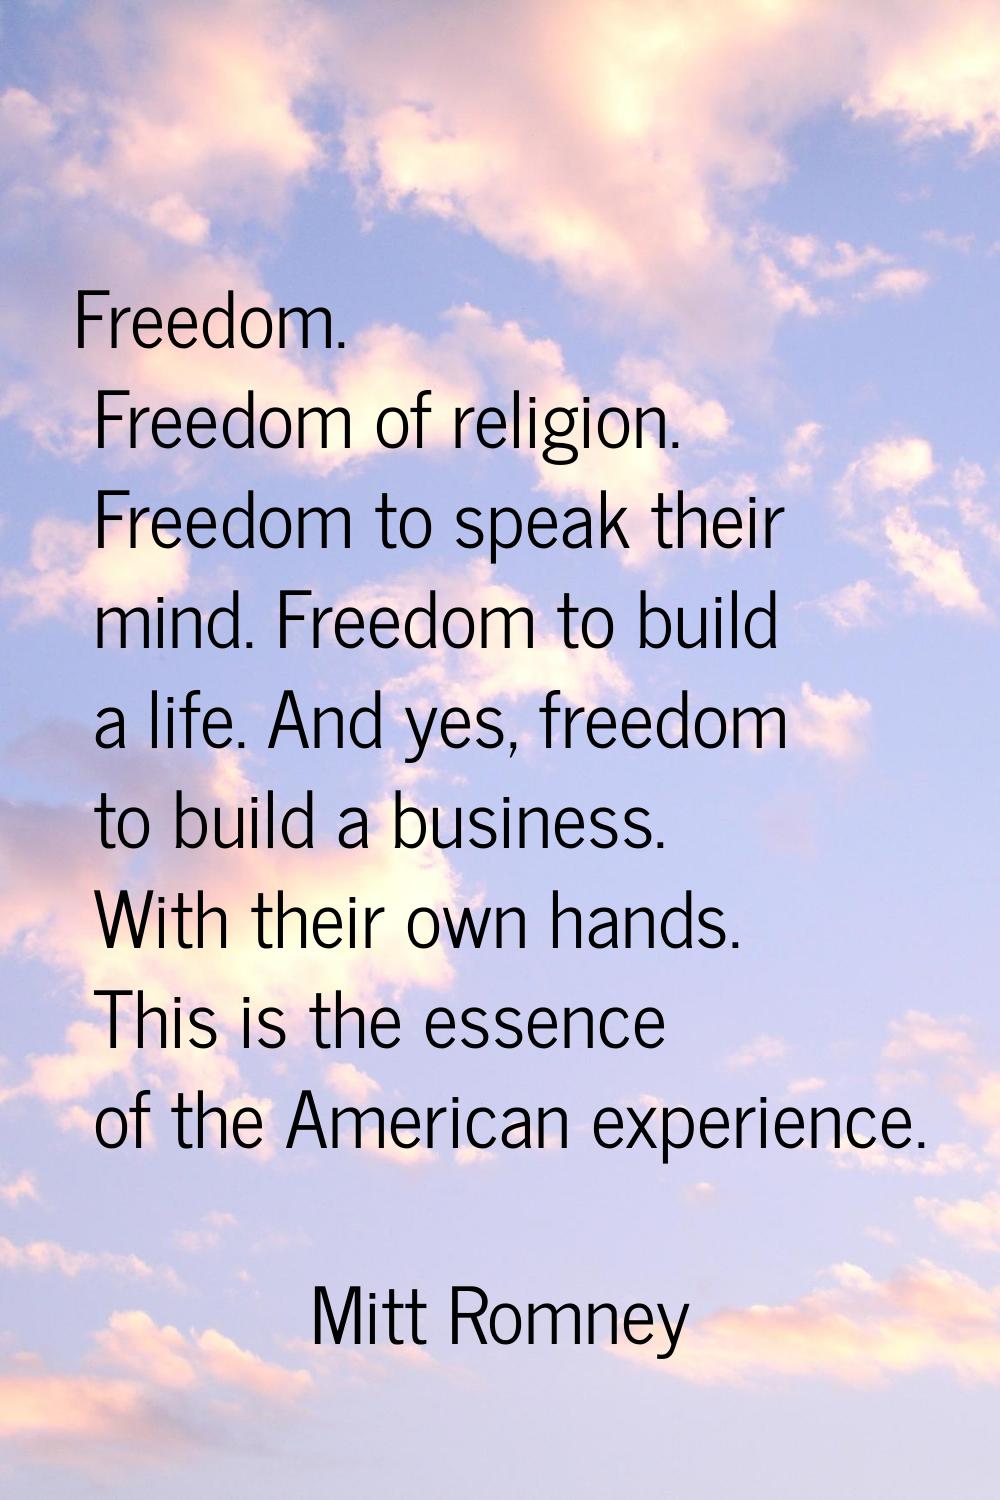 Freedom. Freedom of religion. Freedom to speak their mind. Freedom to build a life. And yes, freedo